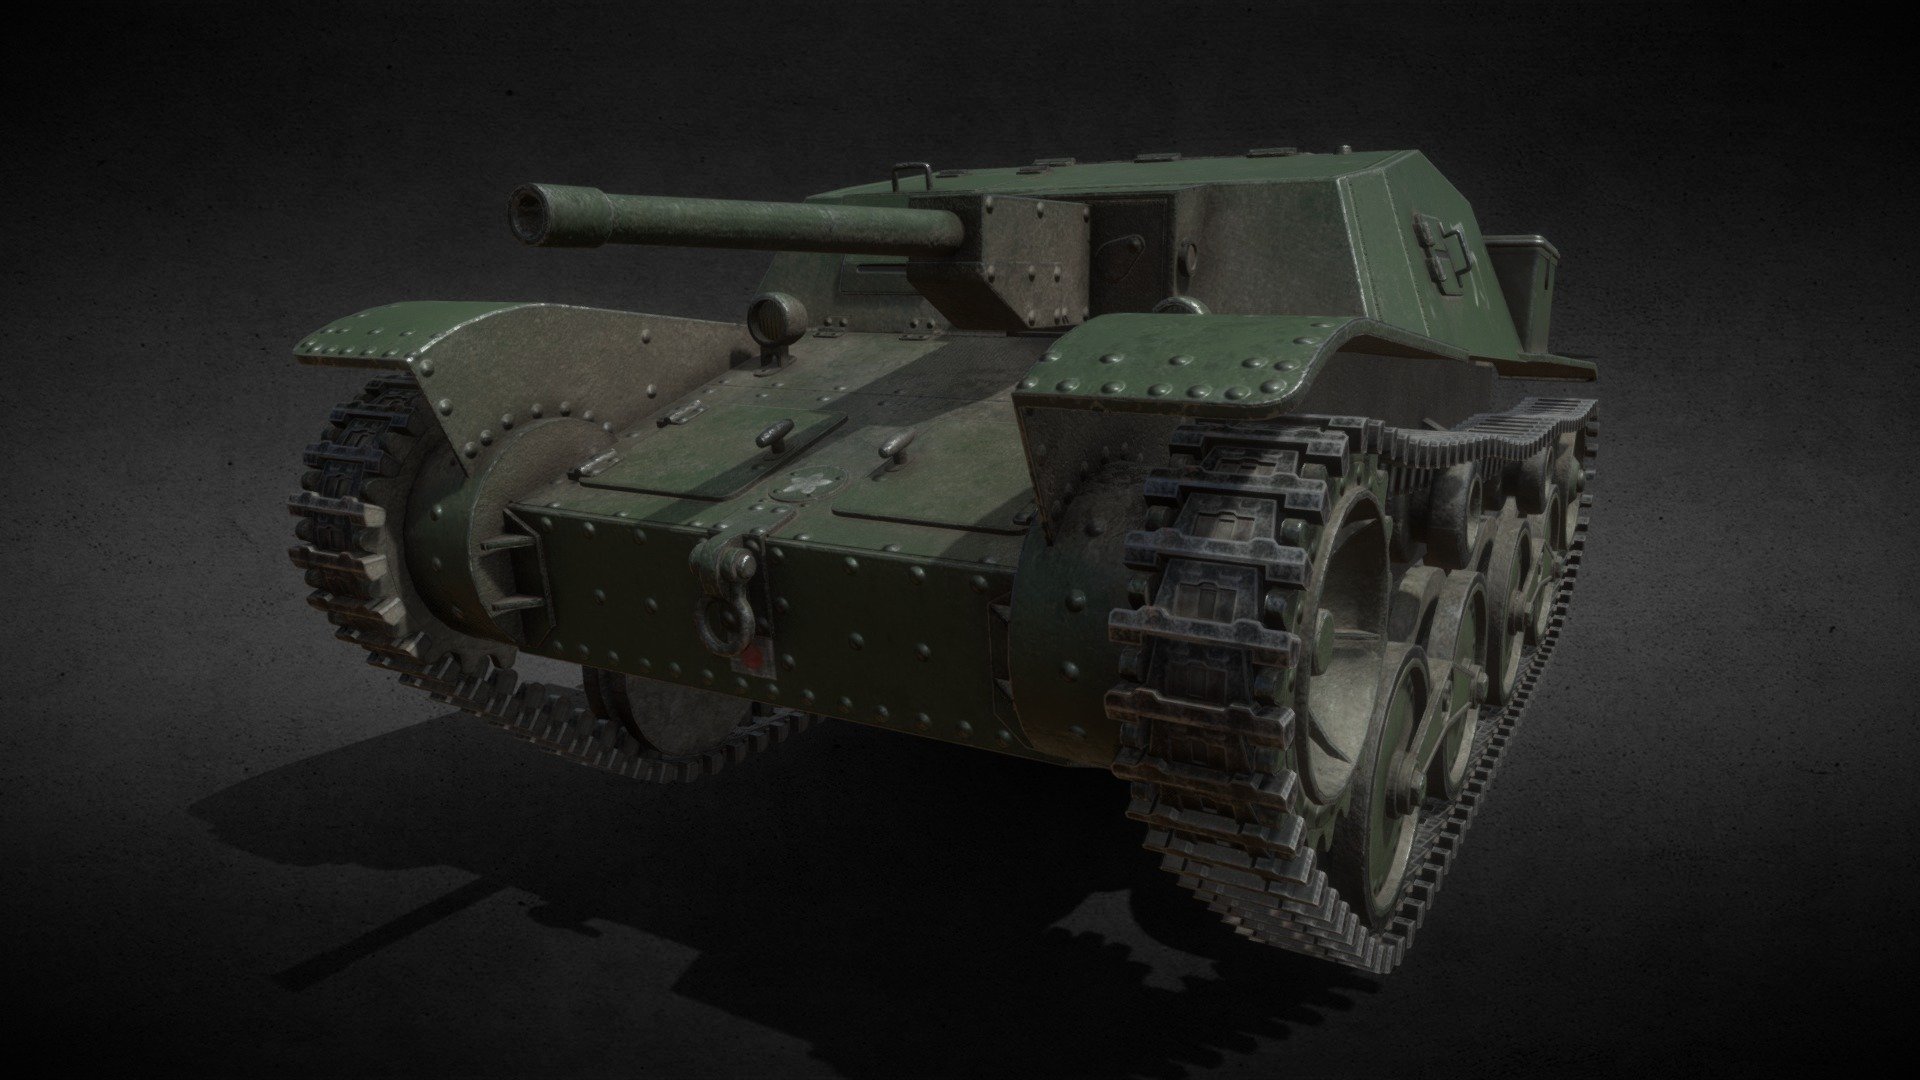 Ready to use Type 5 Ho-Ru 3d model

Type 5 Ho-Ru was supposed to be a light tank destroyer similiar to the German Hetzer, armed with a 47mm gun utilizing the chassis of the Type 95 Ha-Go (3D model also avalible).
Developement started in February 1945 with only one prototype completed before the end of the war.

Green Paint variant.

Ready to use in games or renders.

More Japanese WW II models in the collection: https://skfb.ly/oyoDN

More Tanks and Parts models in the collection: https://skfb.ly/oyoDV

More cheap or free military models in the collection: https://skfb.ly/ooYNo

4096x4096 textures:


albedo
roughness
metalness
normal map
ambient occulusion map

modelled in Blender textured in Adobe Substance 3D Painter - Type 5 Ho-Ru (IJA Tank Destroyer Prototype) - Buy Royalty Free 3D model by AdamKozakGrafika 3d model